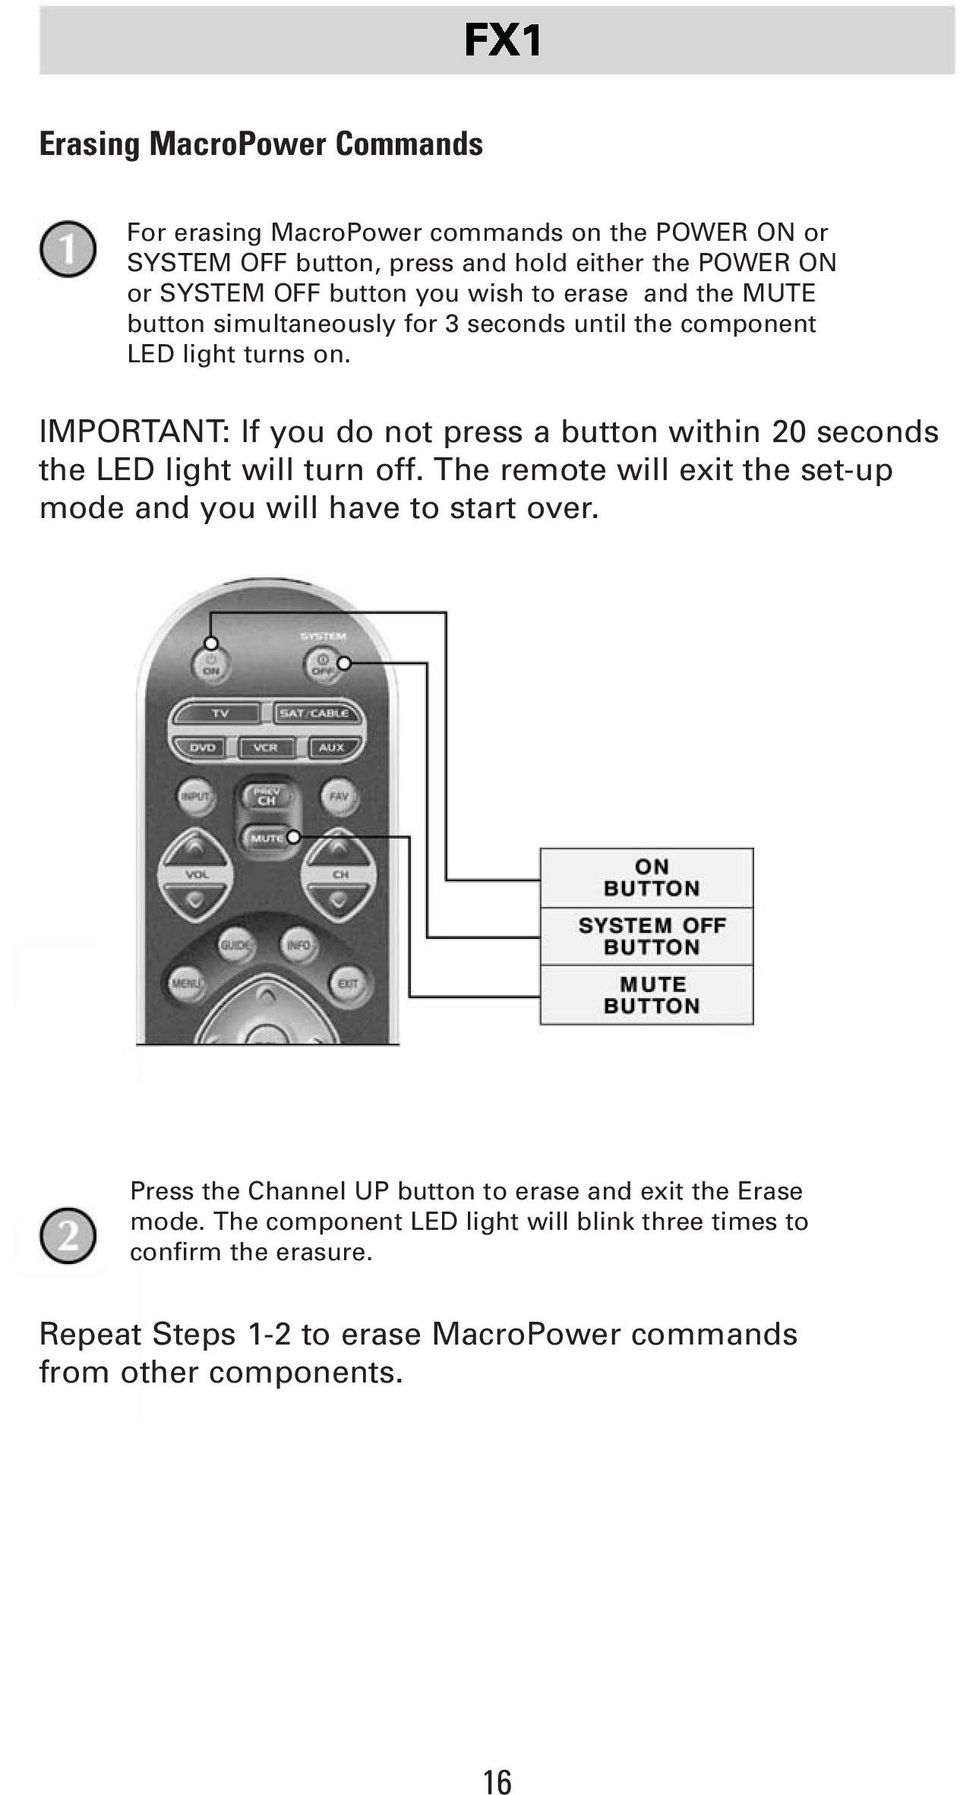 IMPORTANT: If you do not press a button within 20 seconds the LED light will turn off. The remote will exit the set-up mode and you will have to start over.